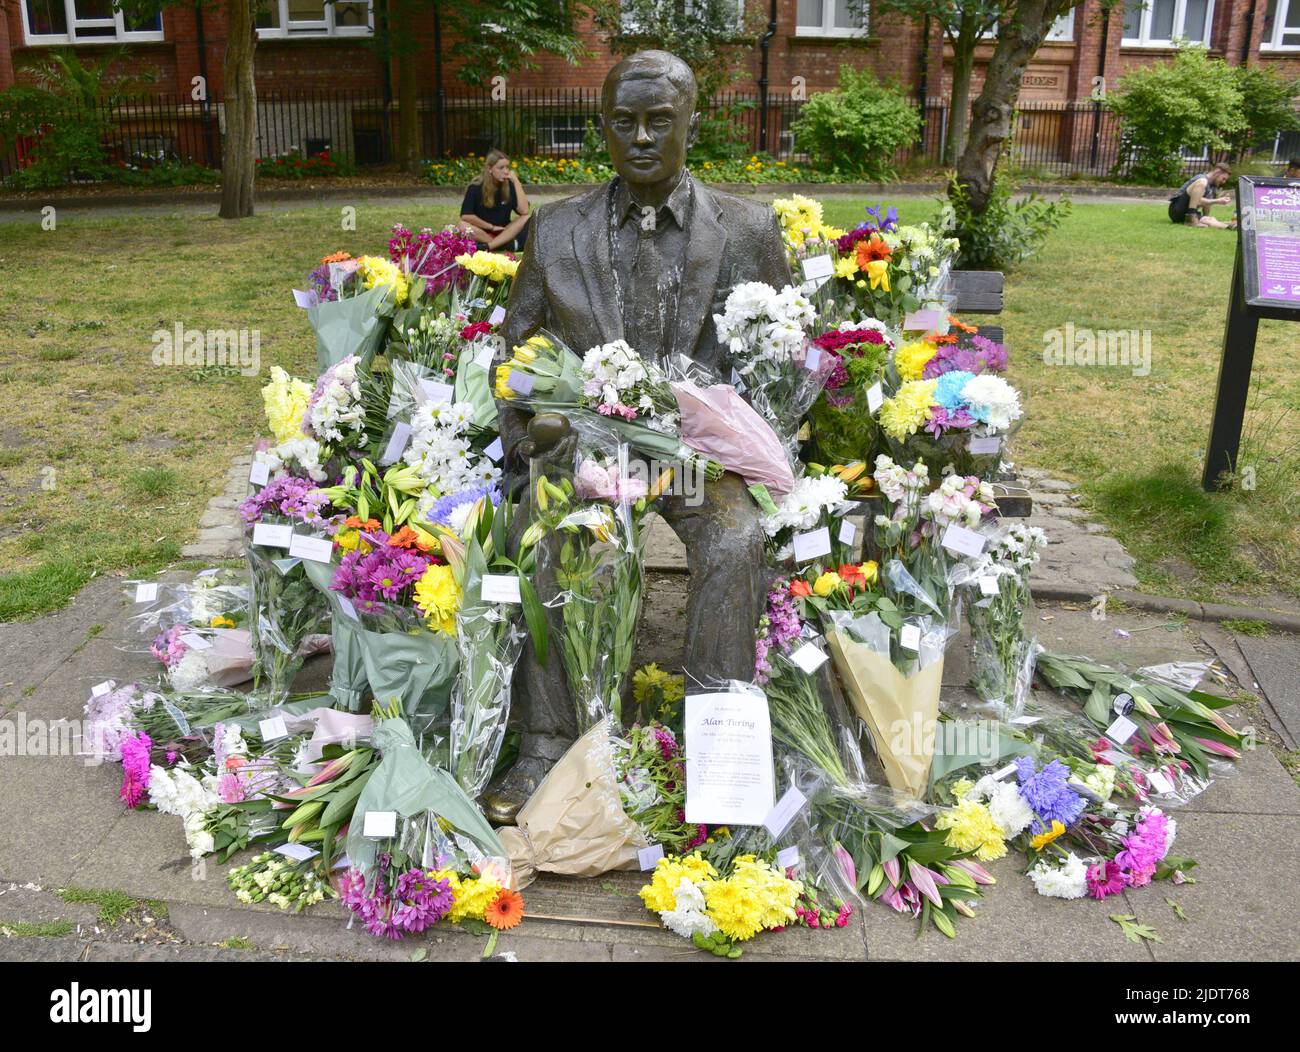 Manchester, UK. 23rd June, 2022. Bunches of flowers left at the Alan Turing statue to celebrate Turing's birthday on 23rd June at Sackville Gardens, central Manchester, England, United Kingdom, British Isles. Turing  is considered to be the father of theoretical computer science and artificial intelligence, played a major role in the development of early computers at the University of Manchester and was a renowned World War II codebreaker. The charity 'eQuality Time' takes the lead in leaving flowers on this date. Credit: Terry Waller/Alamy Live News Stock Photo